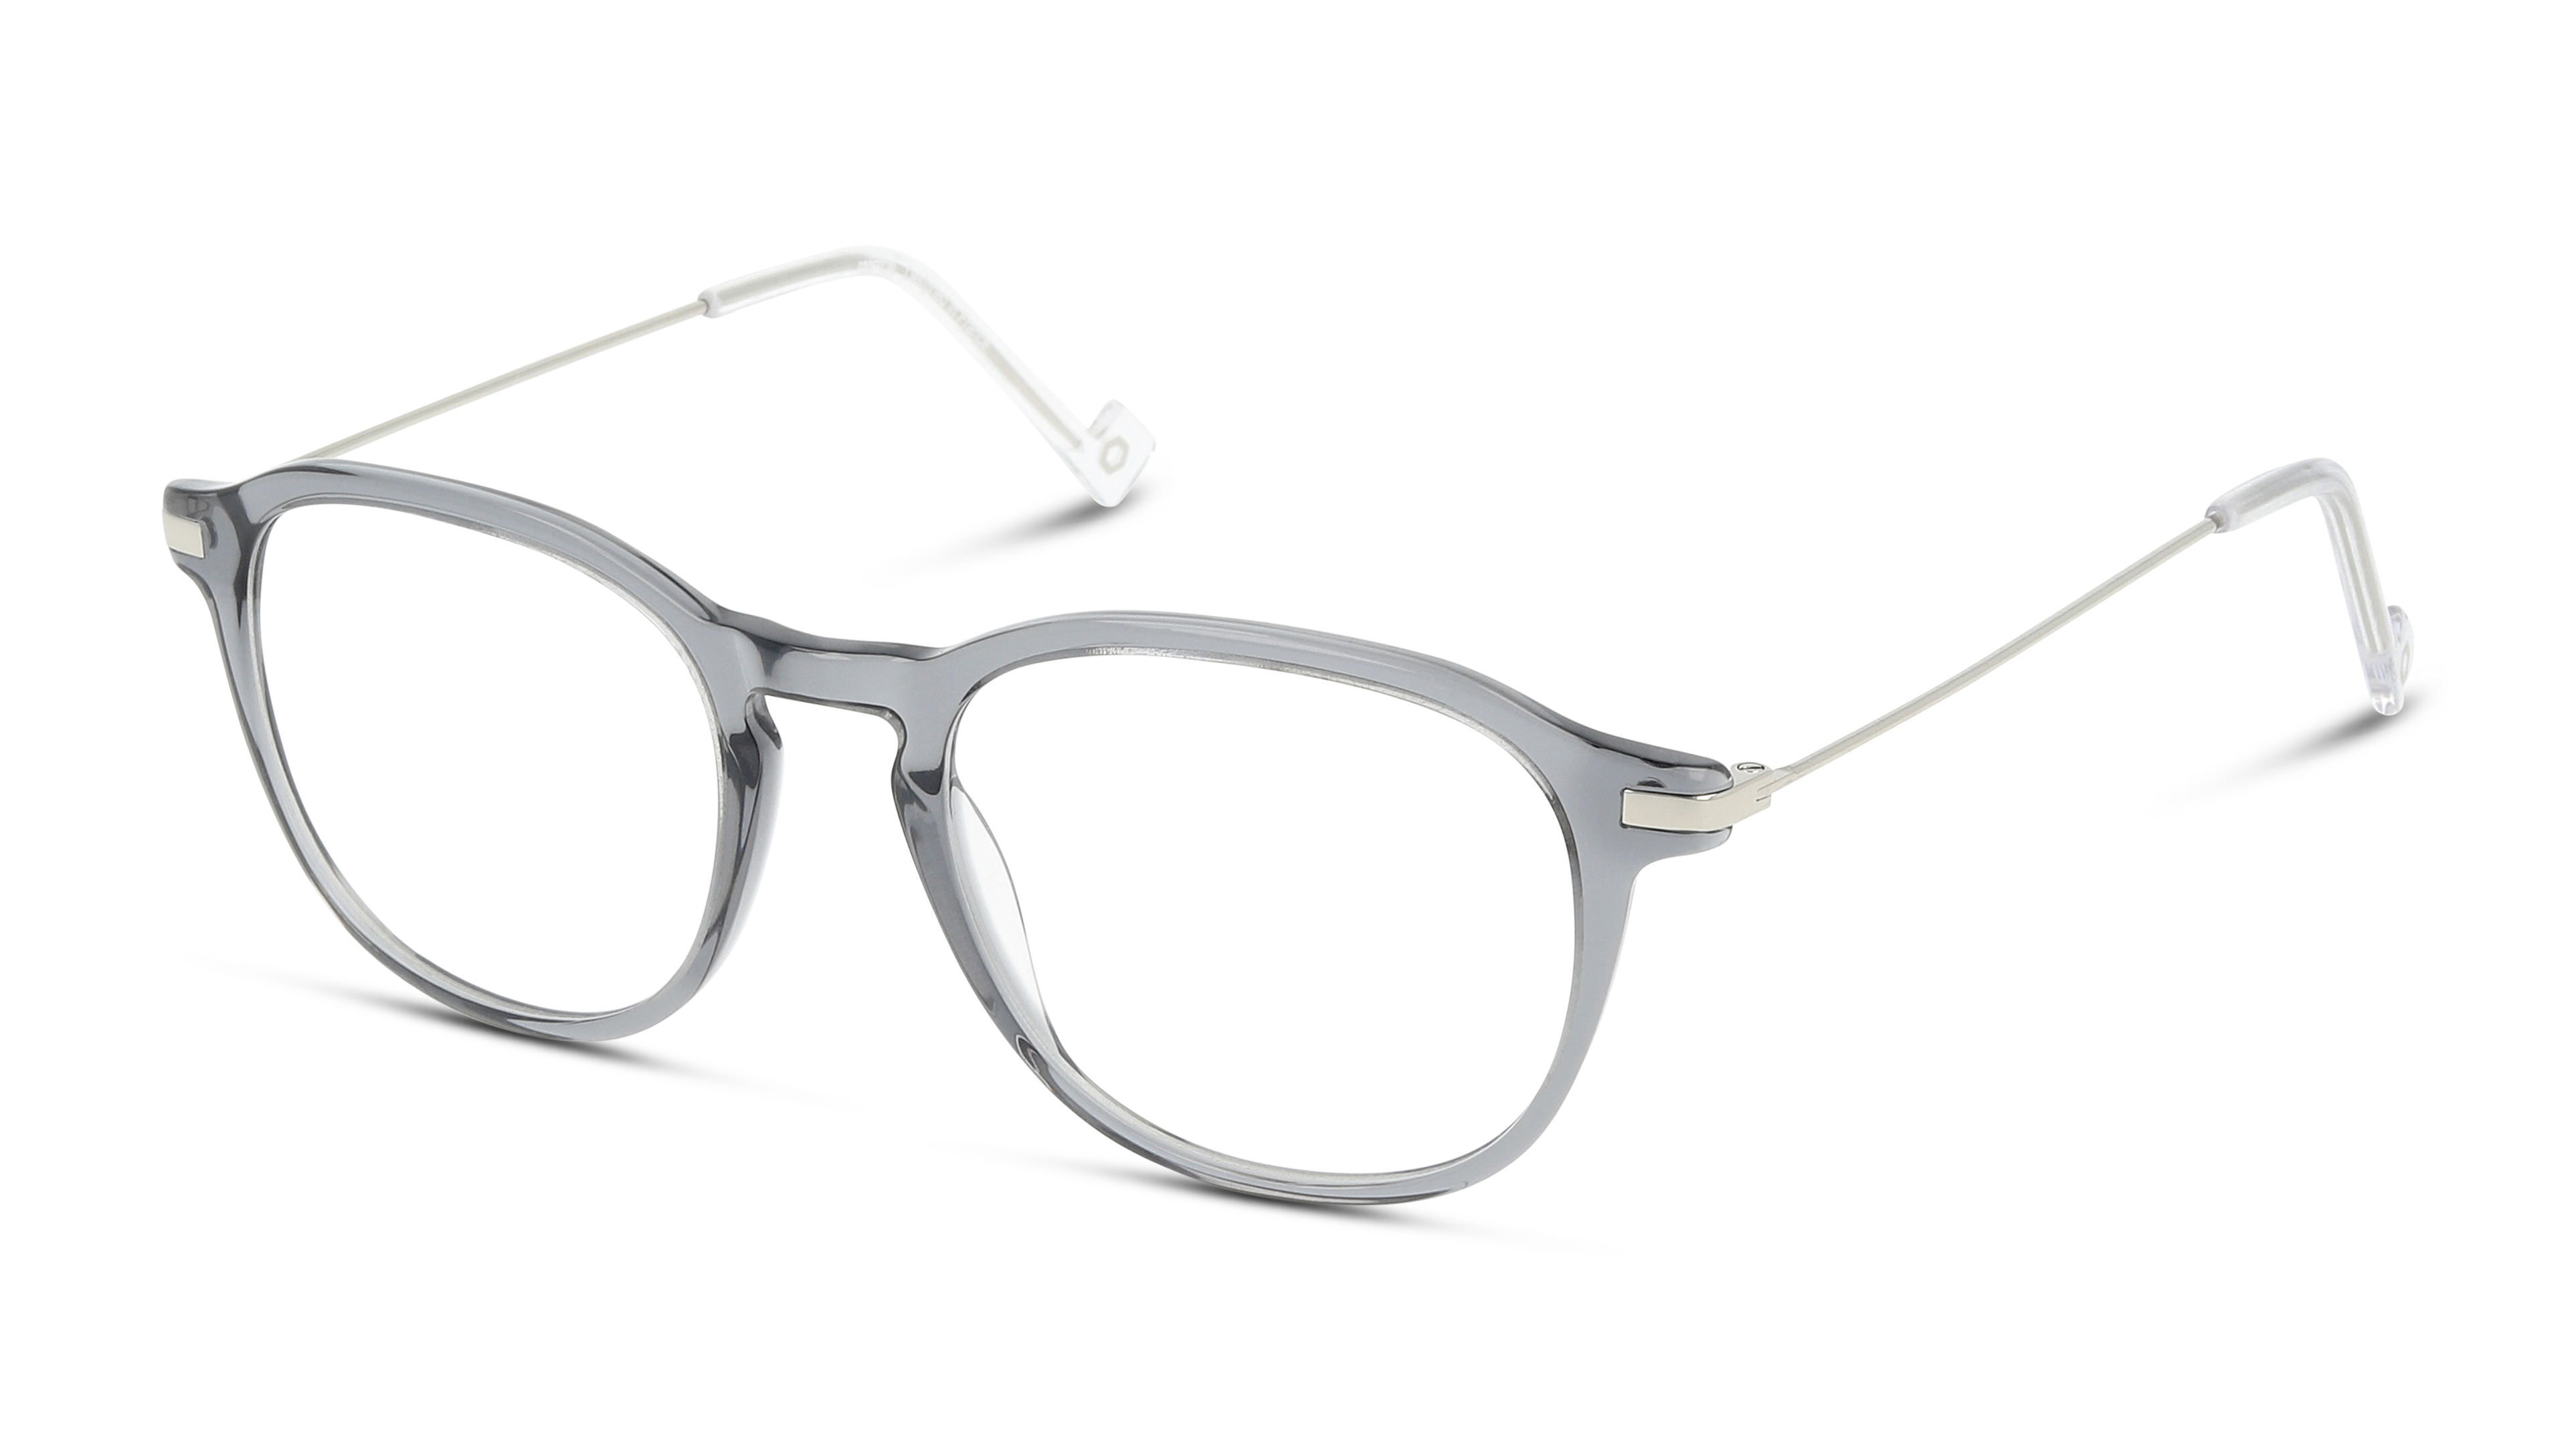 Angle_Left01 Unofficial UNOM0071 Glasses Transparent / Grey